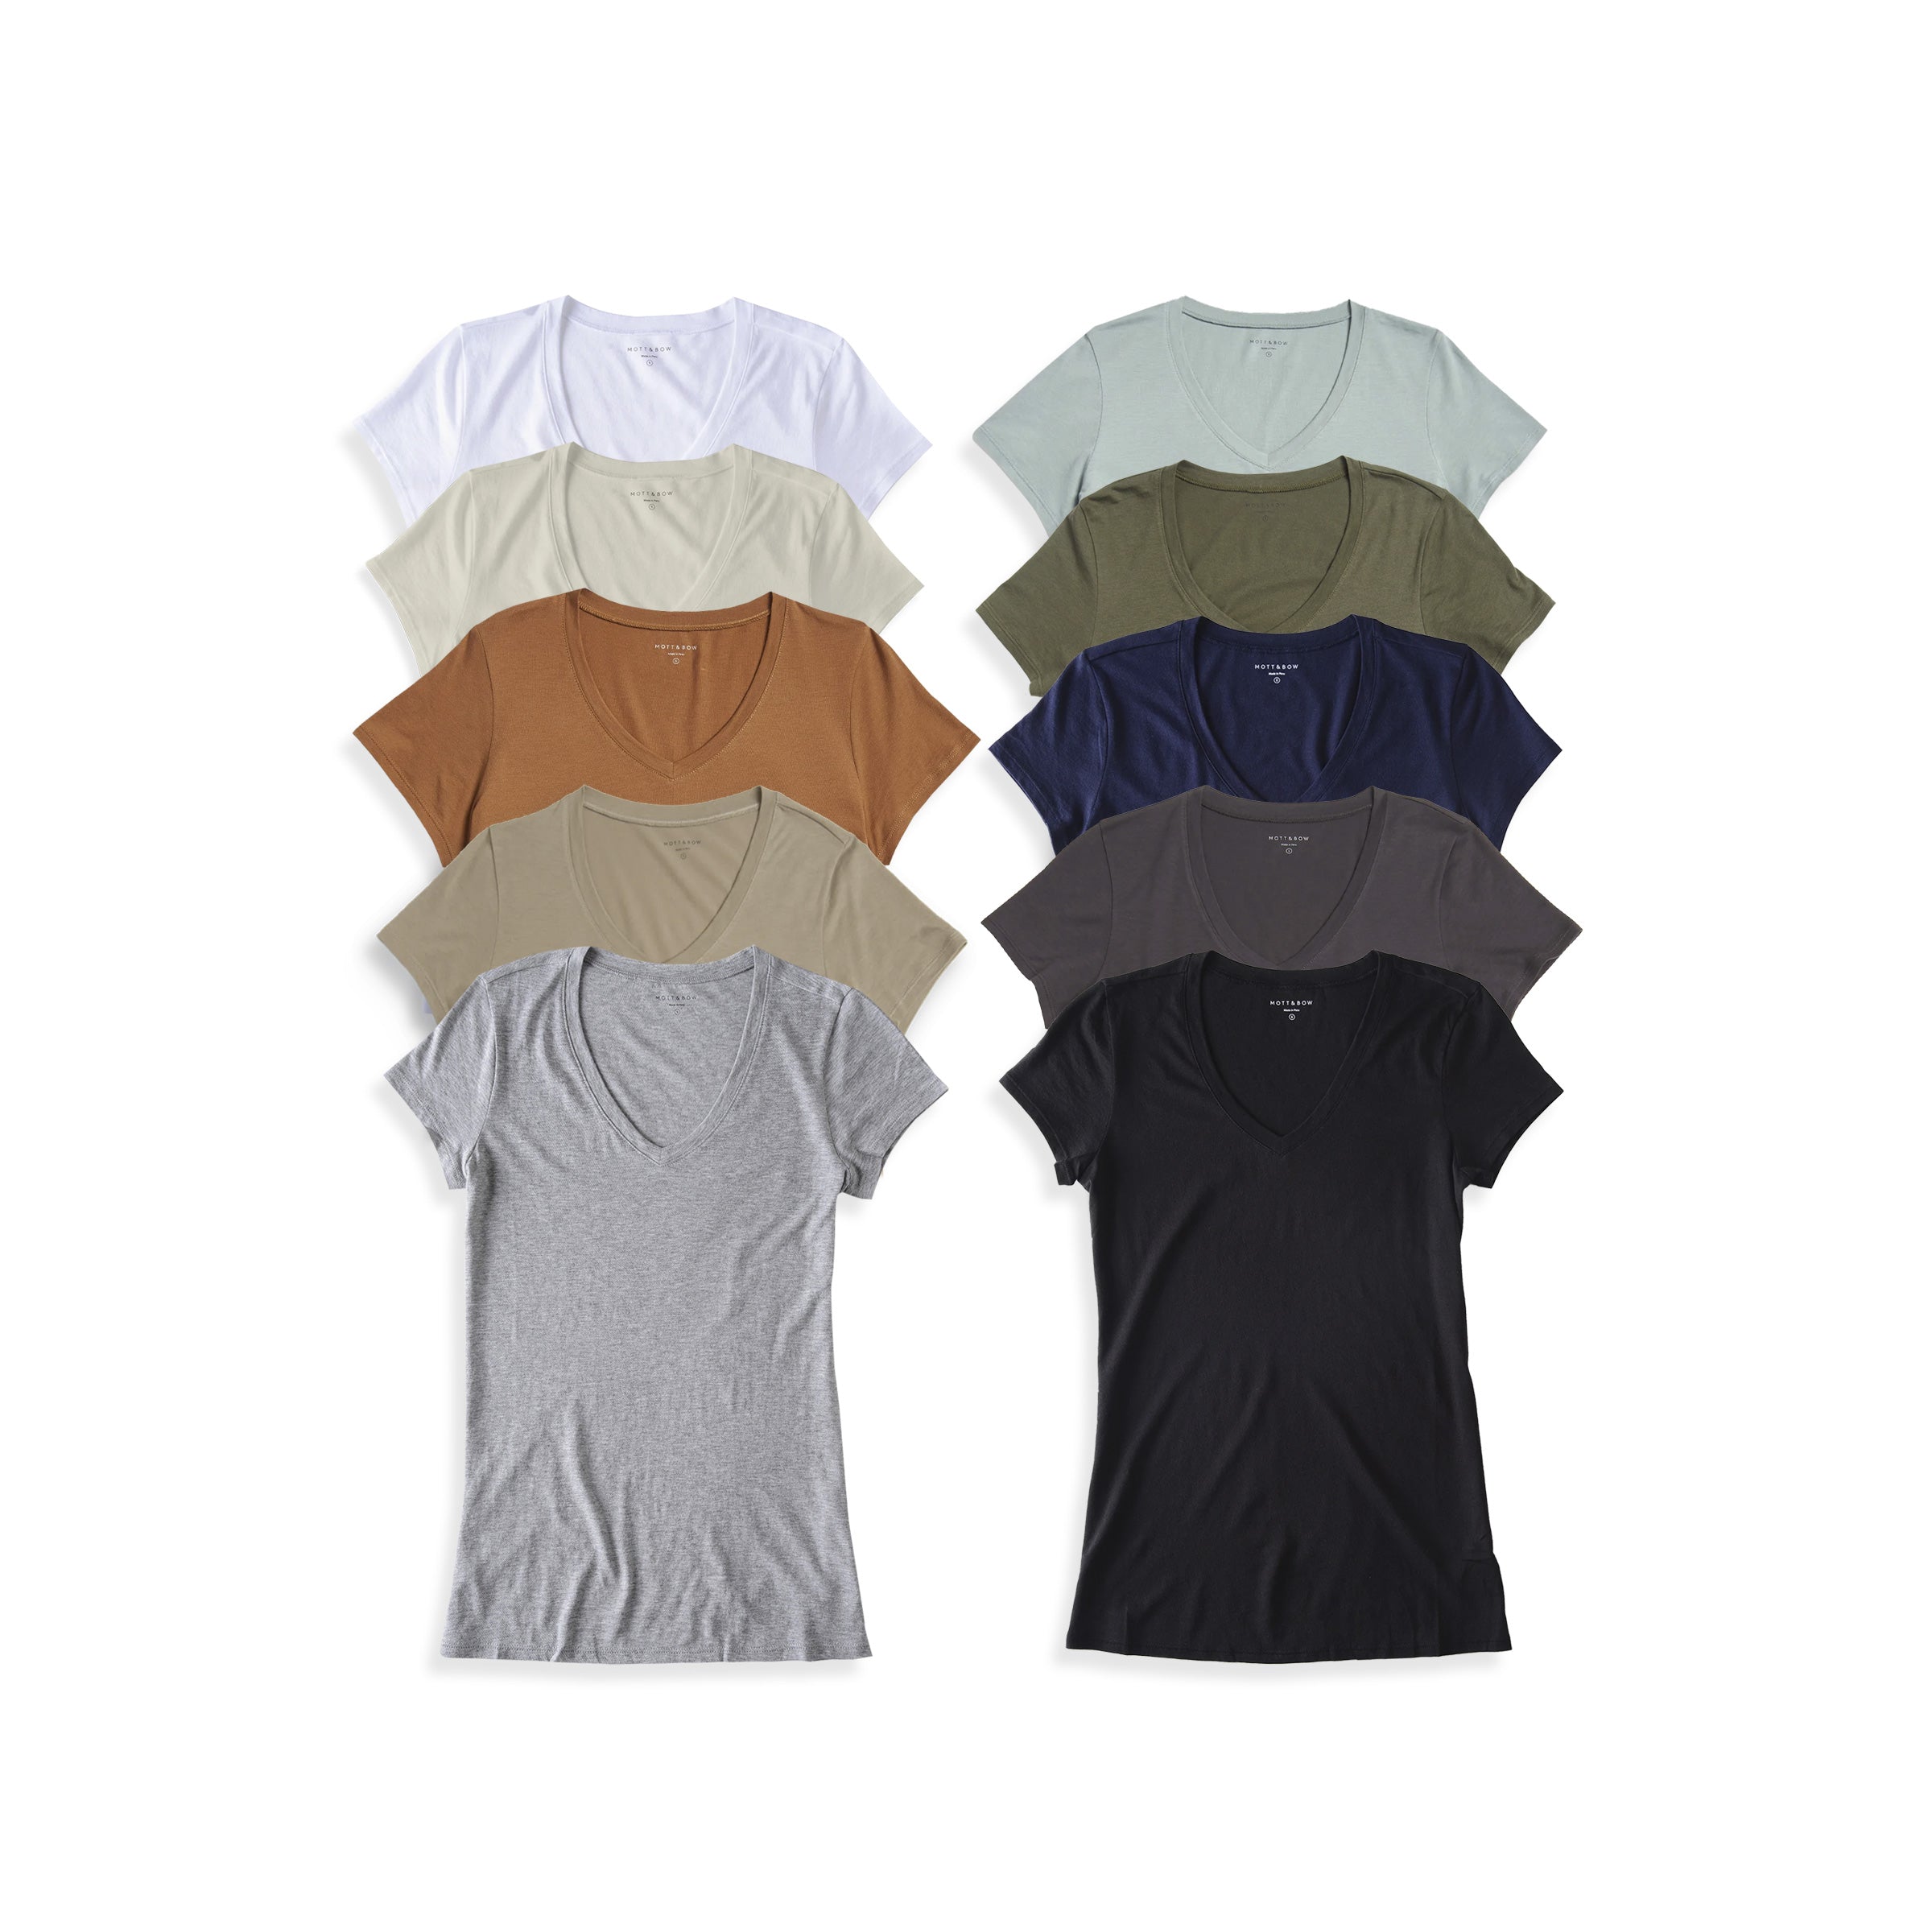  wearing 1 White/1 Vintage White/1 Cardamom/1 Olive/1 Heather Gray/1 Vine/1 Military Green/1 Navy/1 Noche Gray/1 Black SPECIAL 10-PACK: V-NECK MARCY TEE